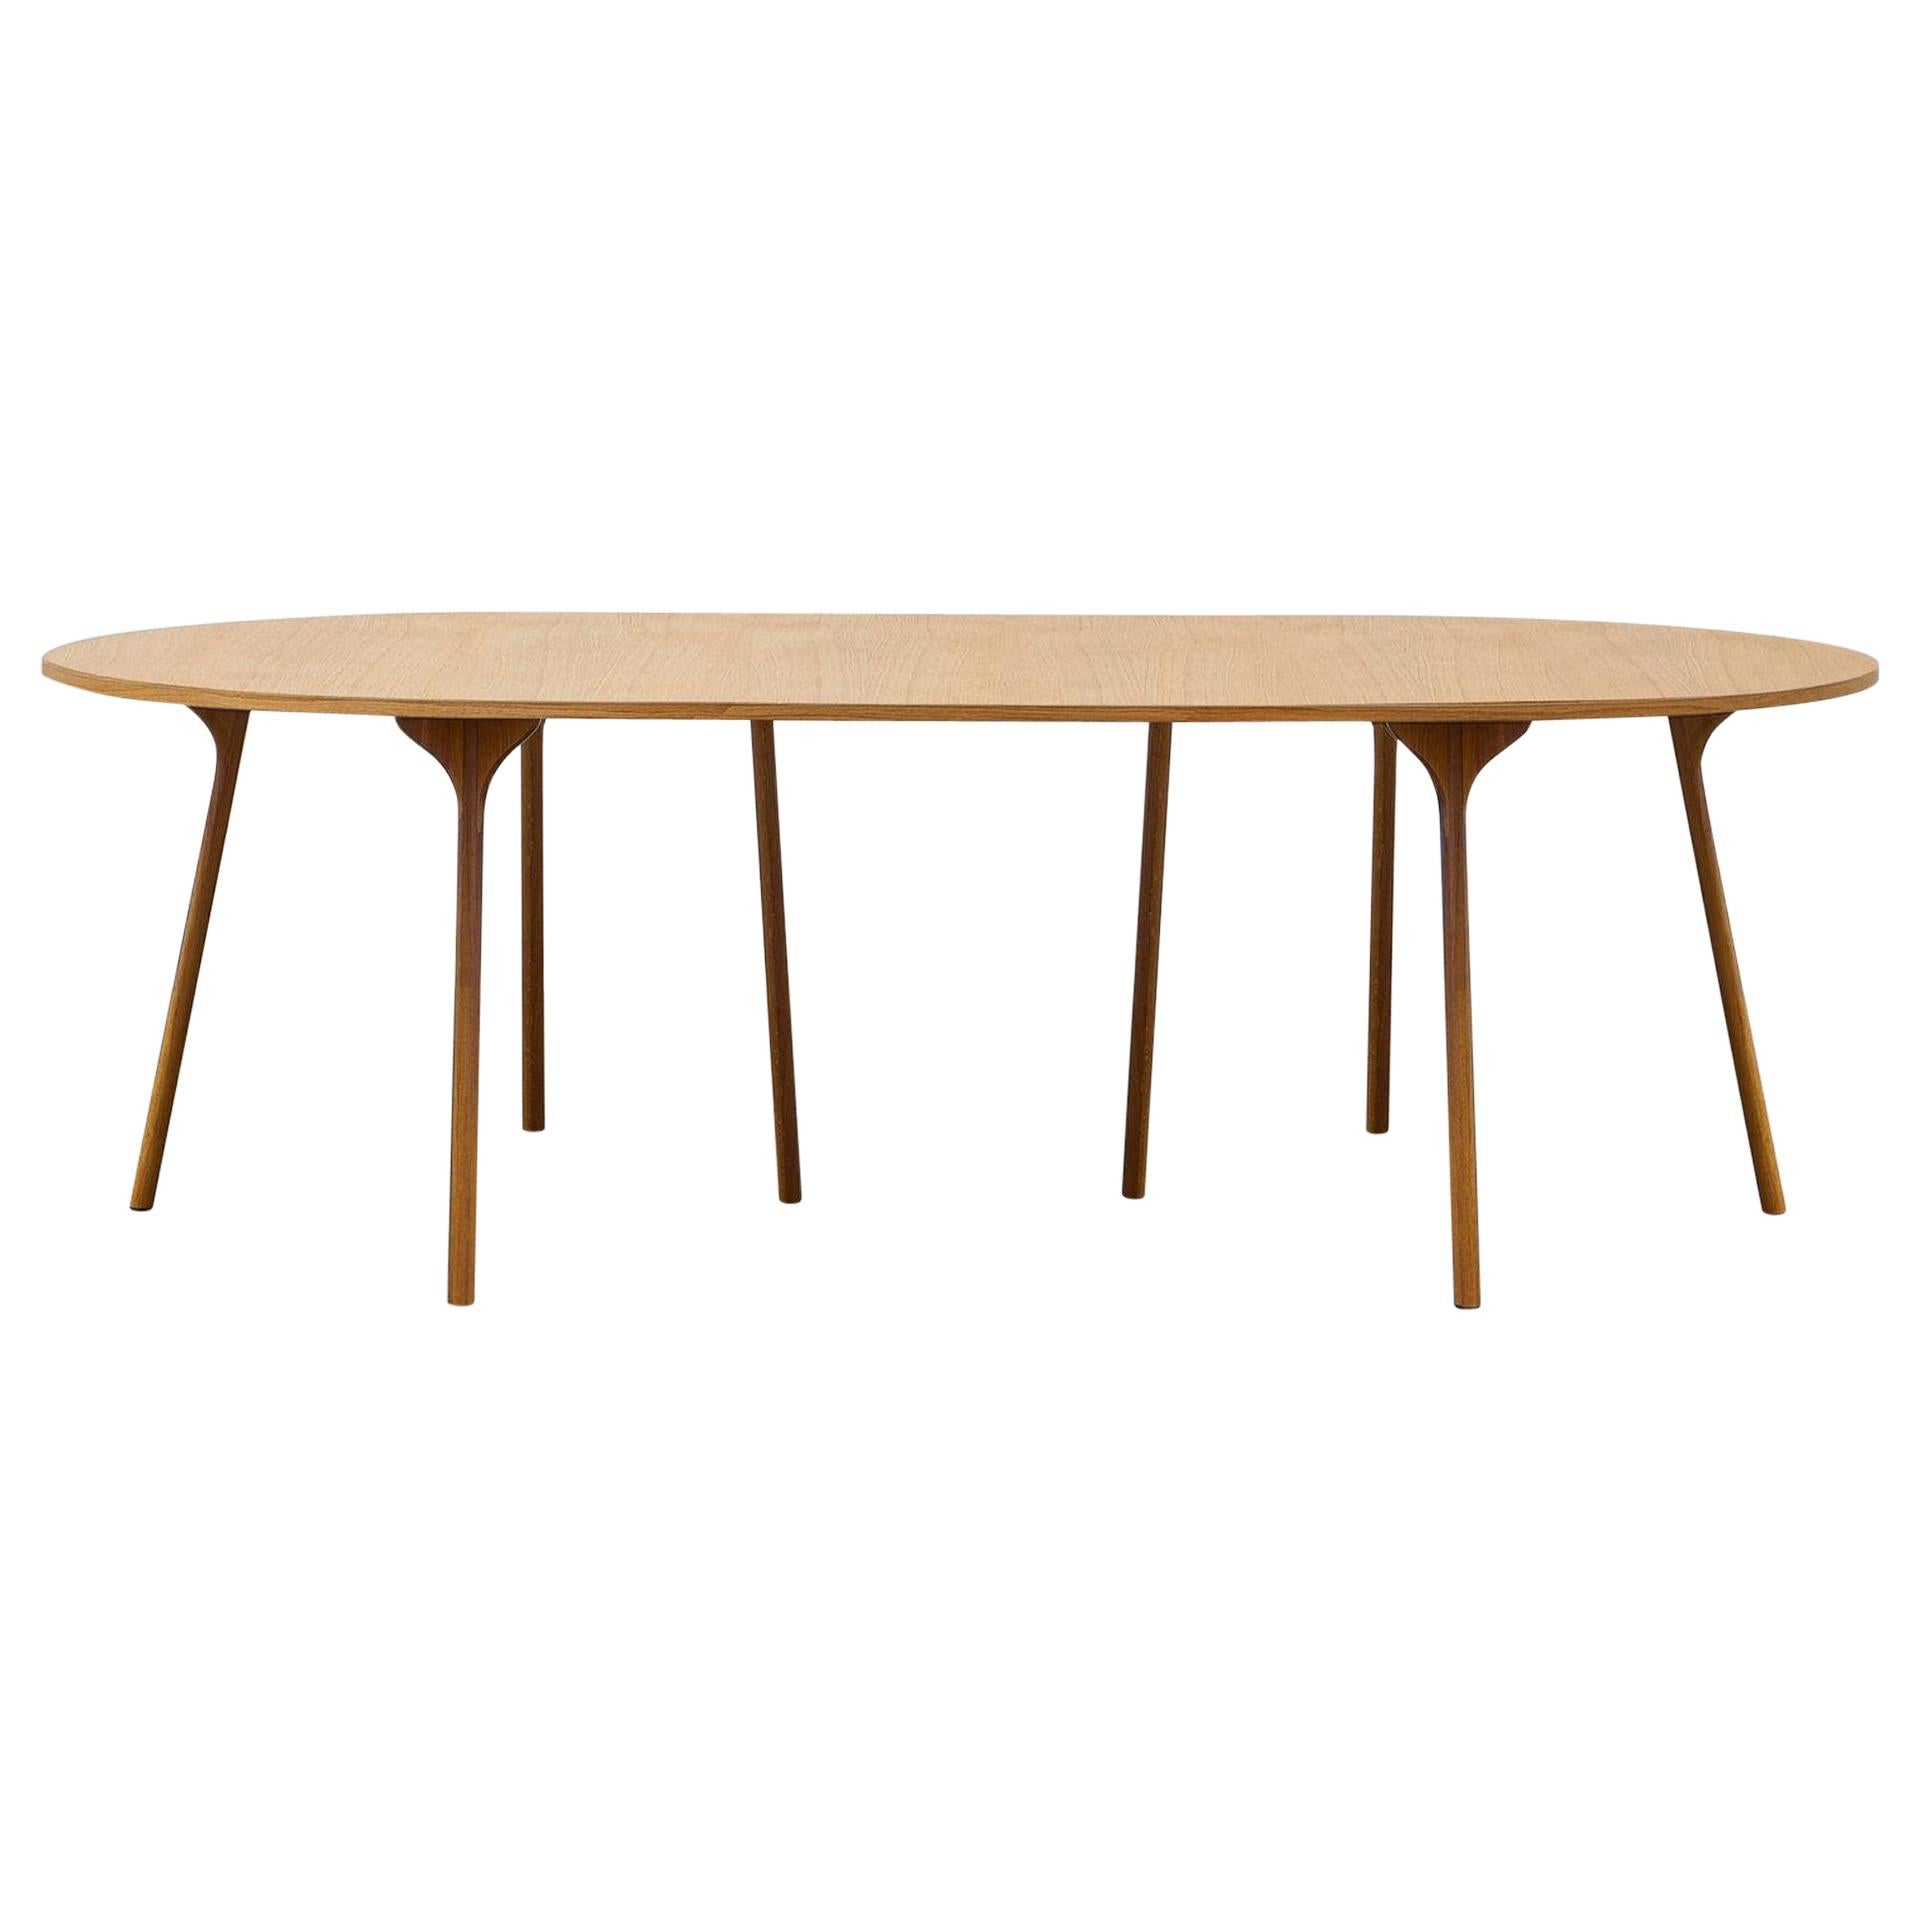 PH Circle Table, 1270x2370mm, Natural Oakwood Legs, Veneer Table Plate and Edge For Sale